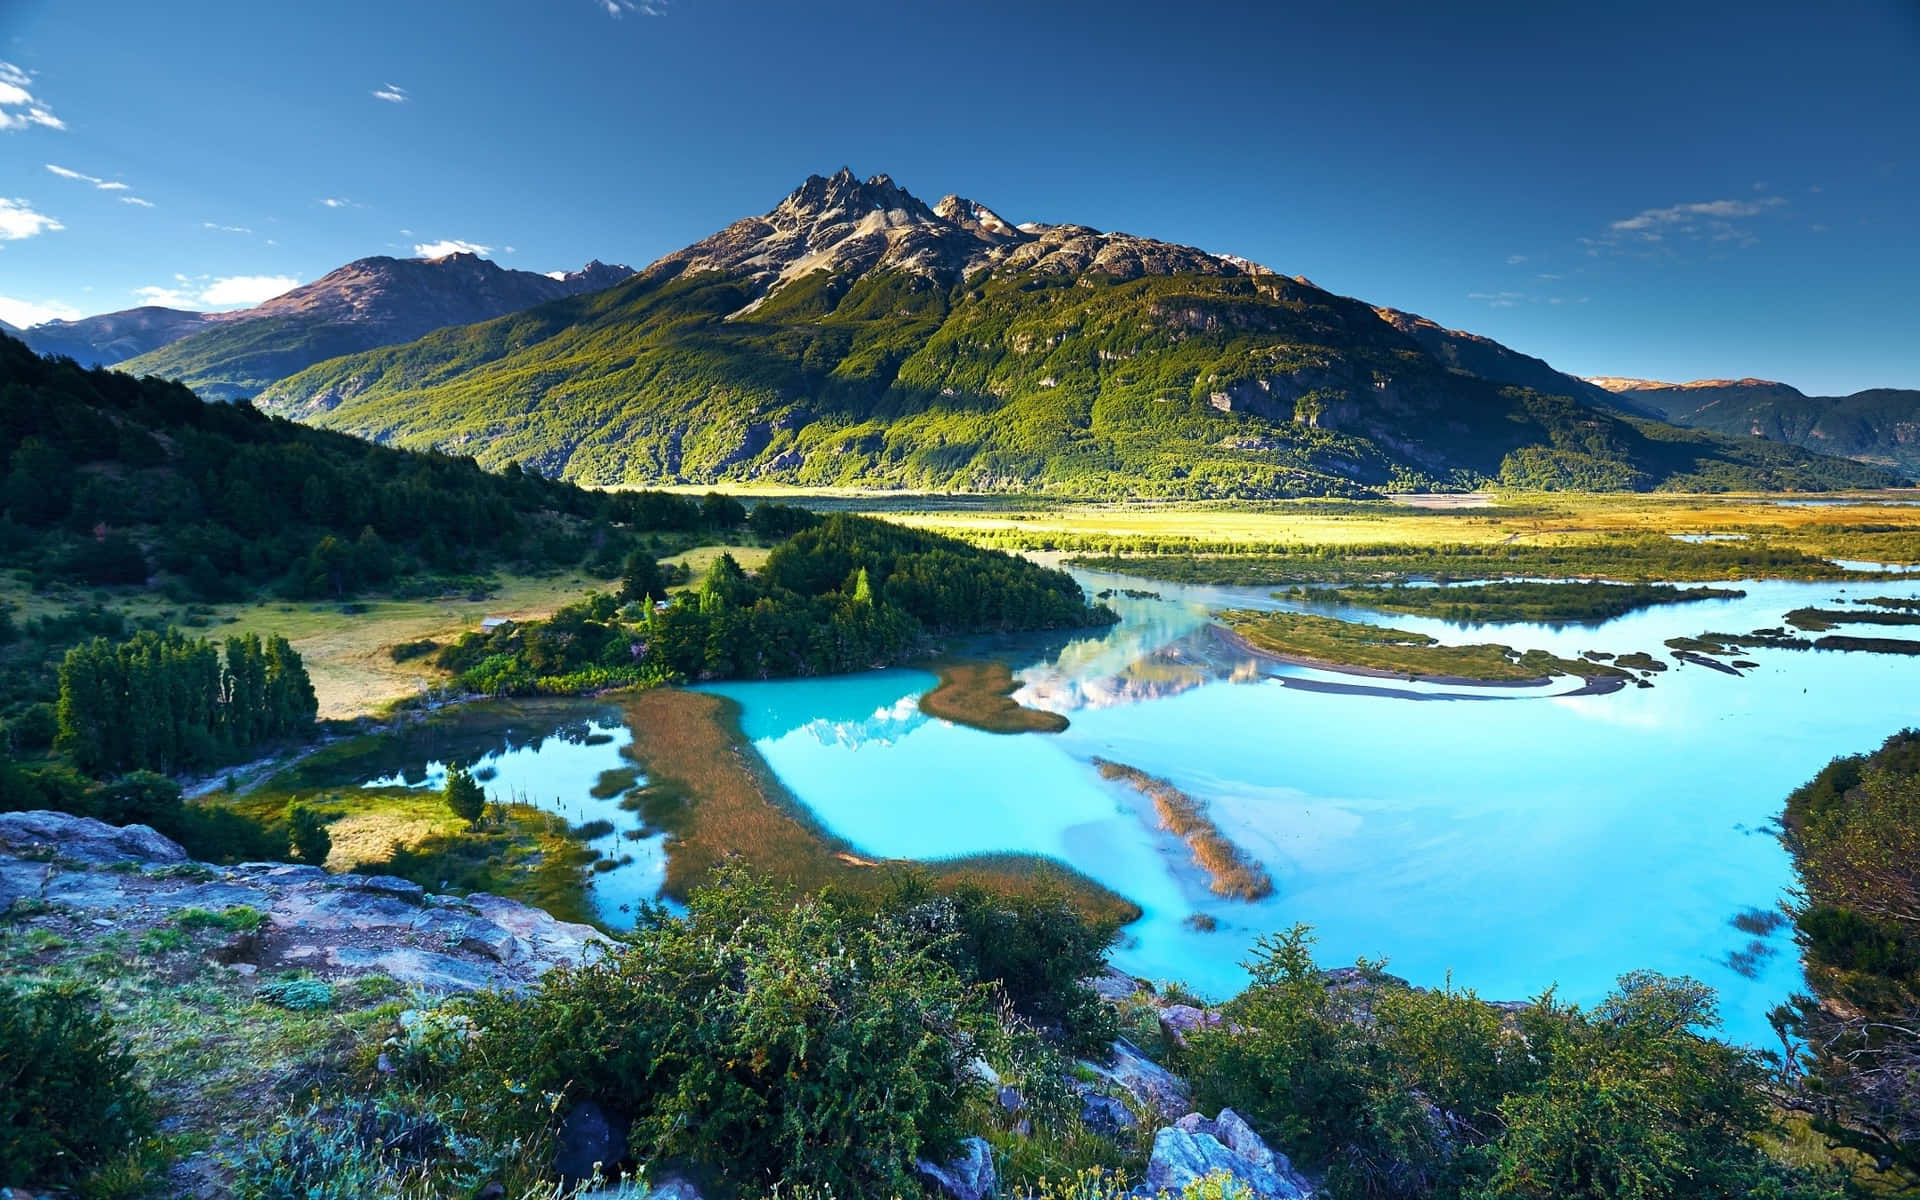 Take a journey of discovery through Patagonia